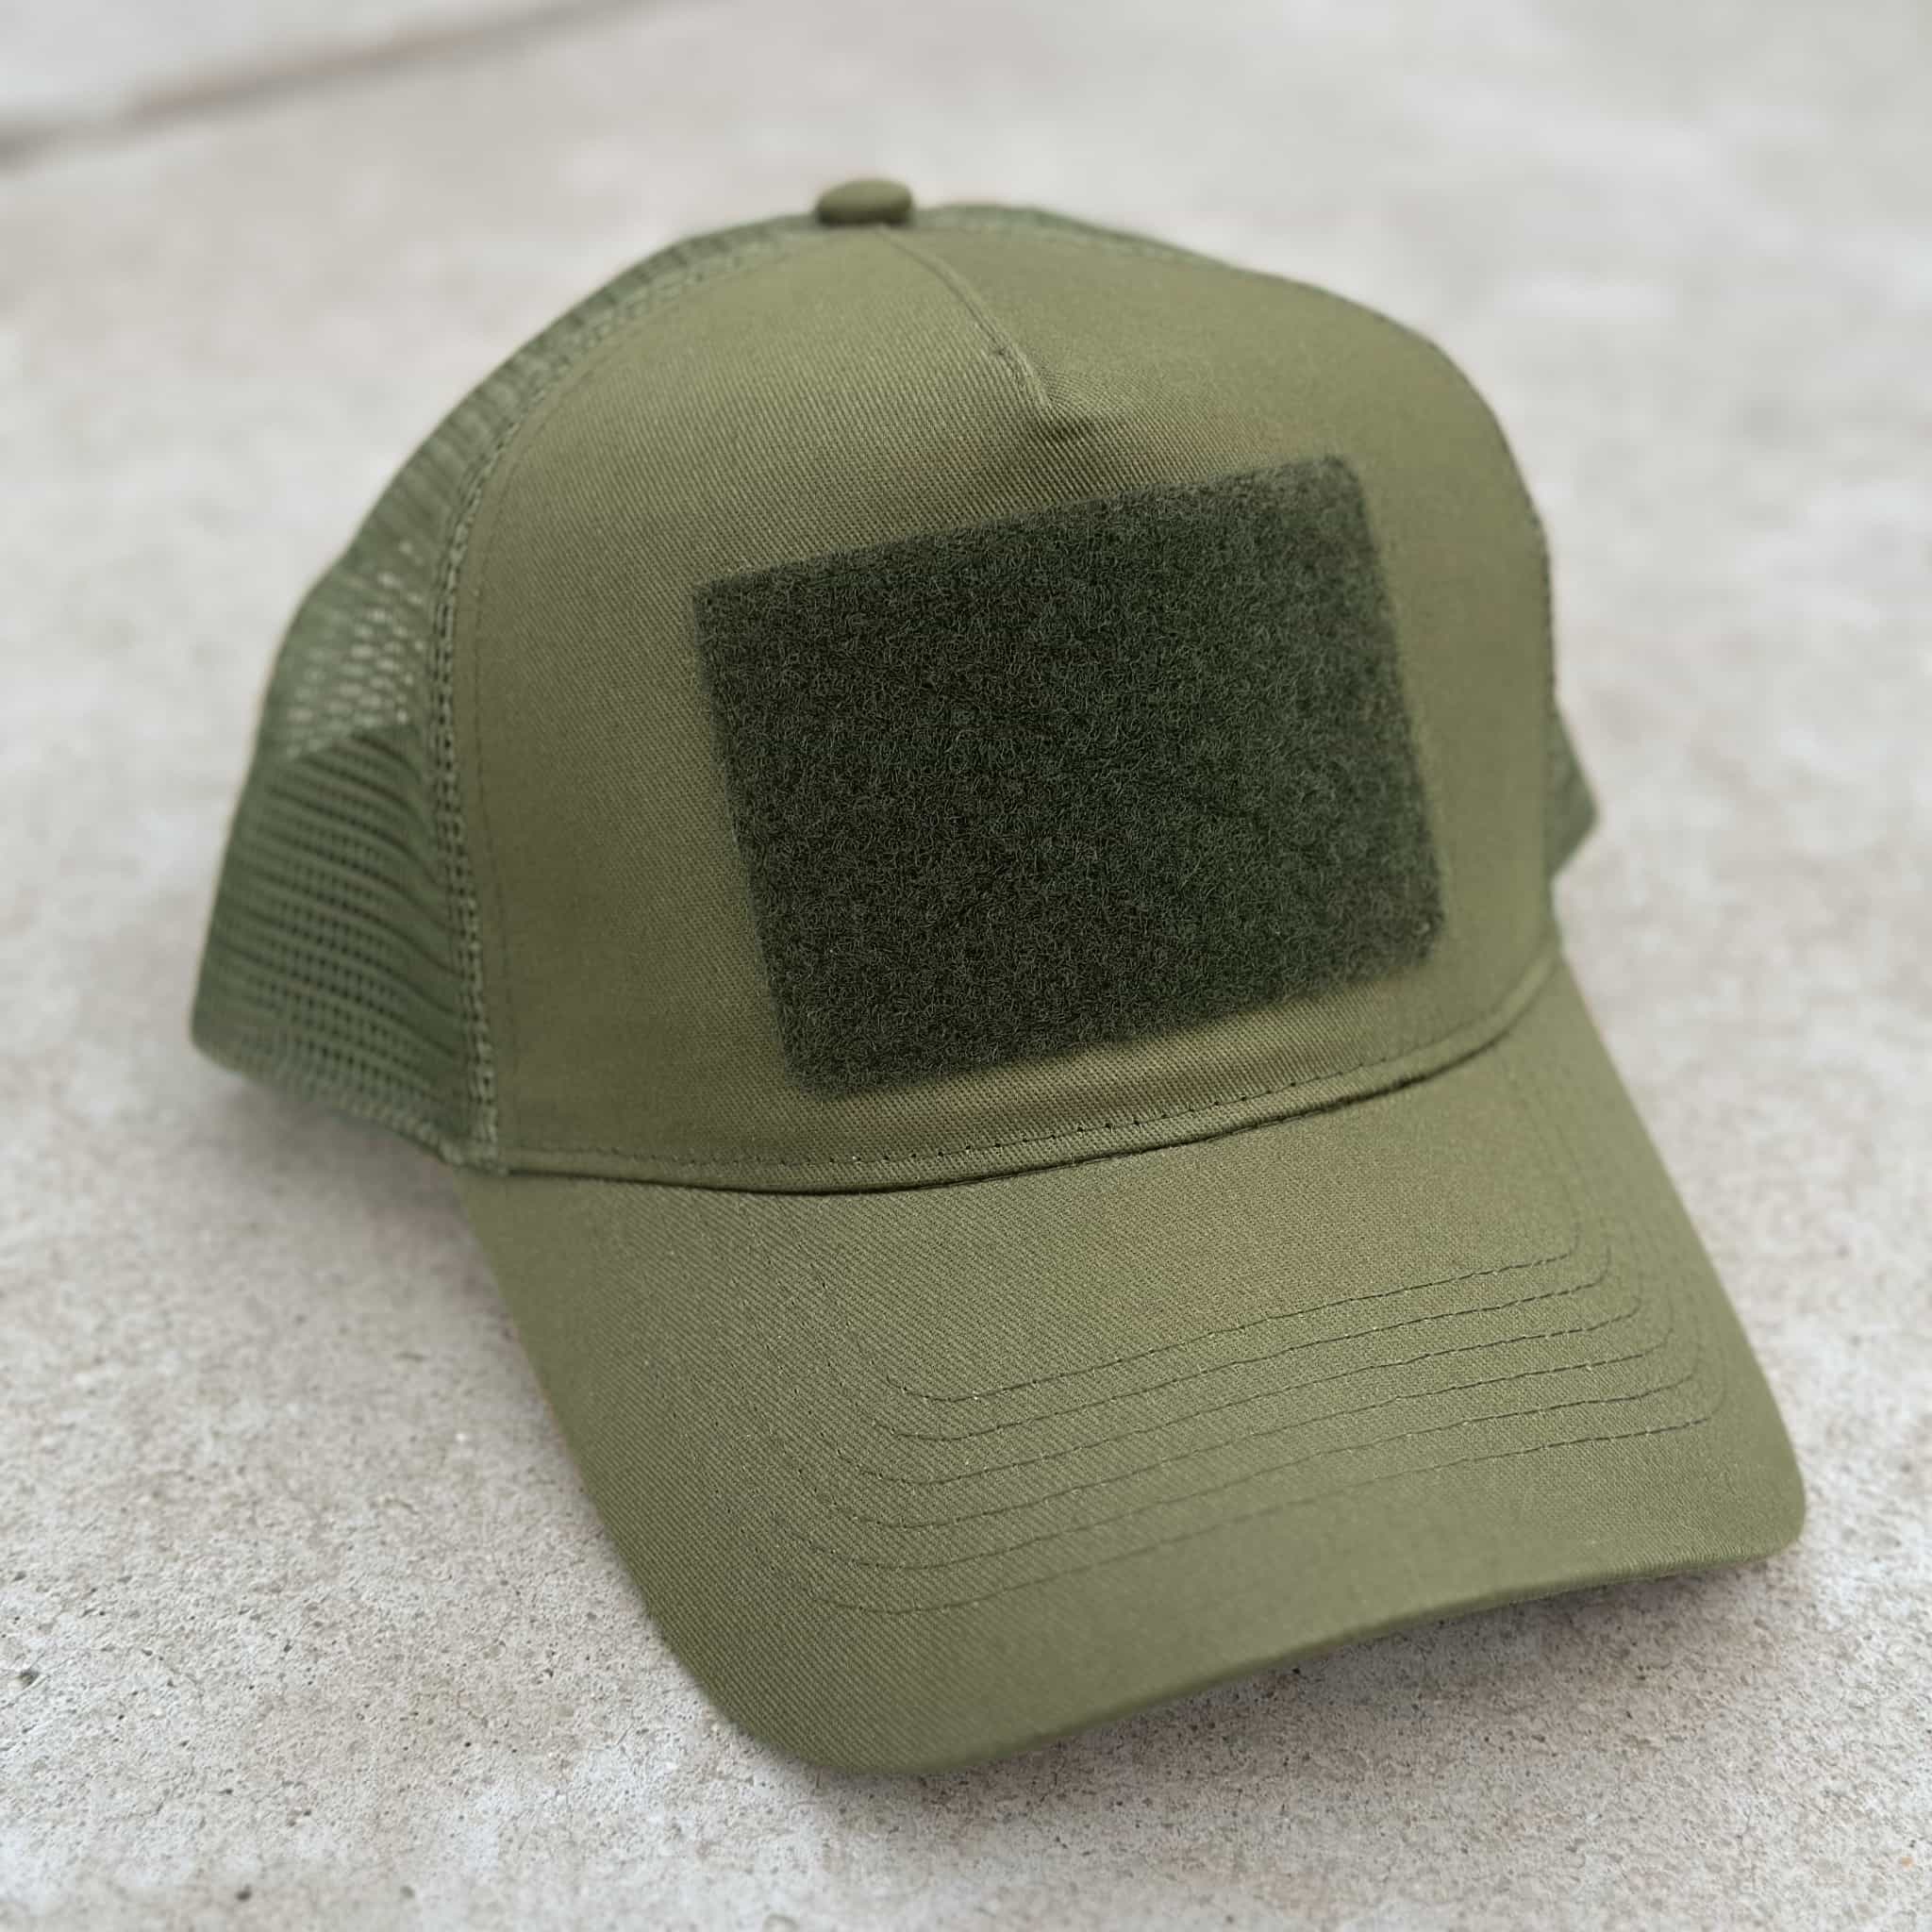 The Blank Canvas Snapback Cap in military green color with large hook-and-loop area on the front